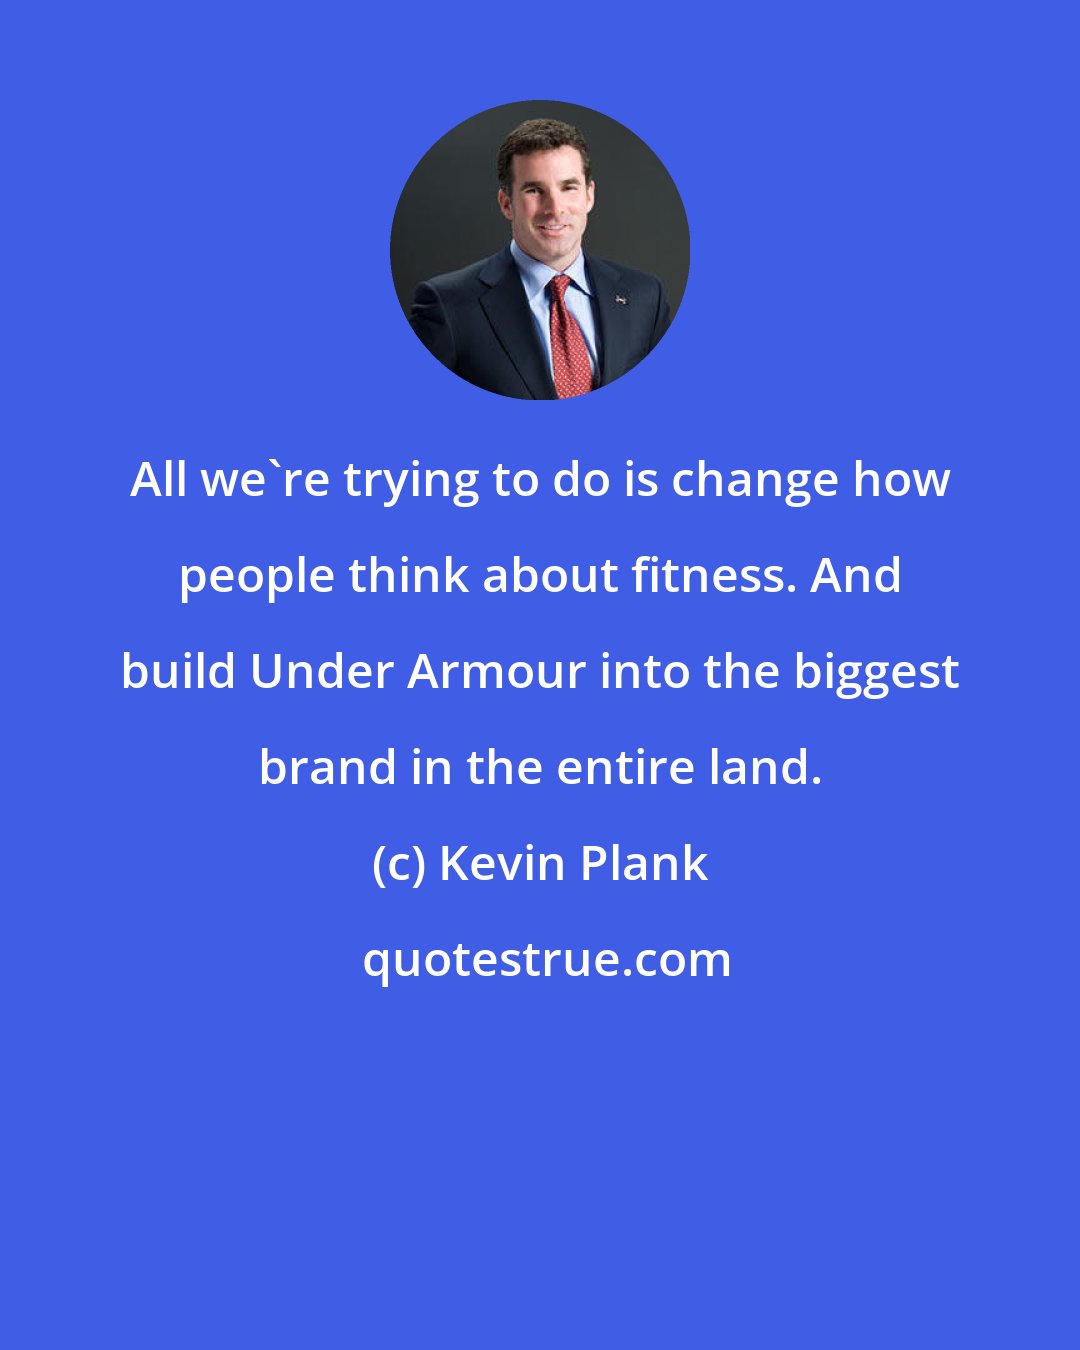 Kevin Plank: All we're trying to do is change how people think about fitness. And build Under Armour into the biggest brand in the entire land.